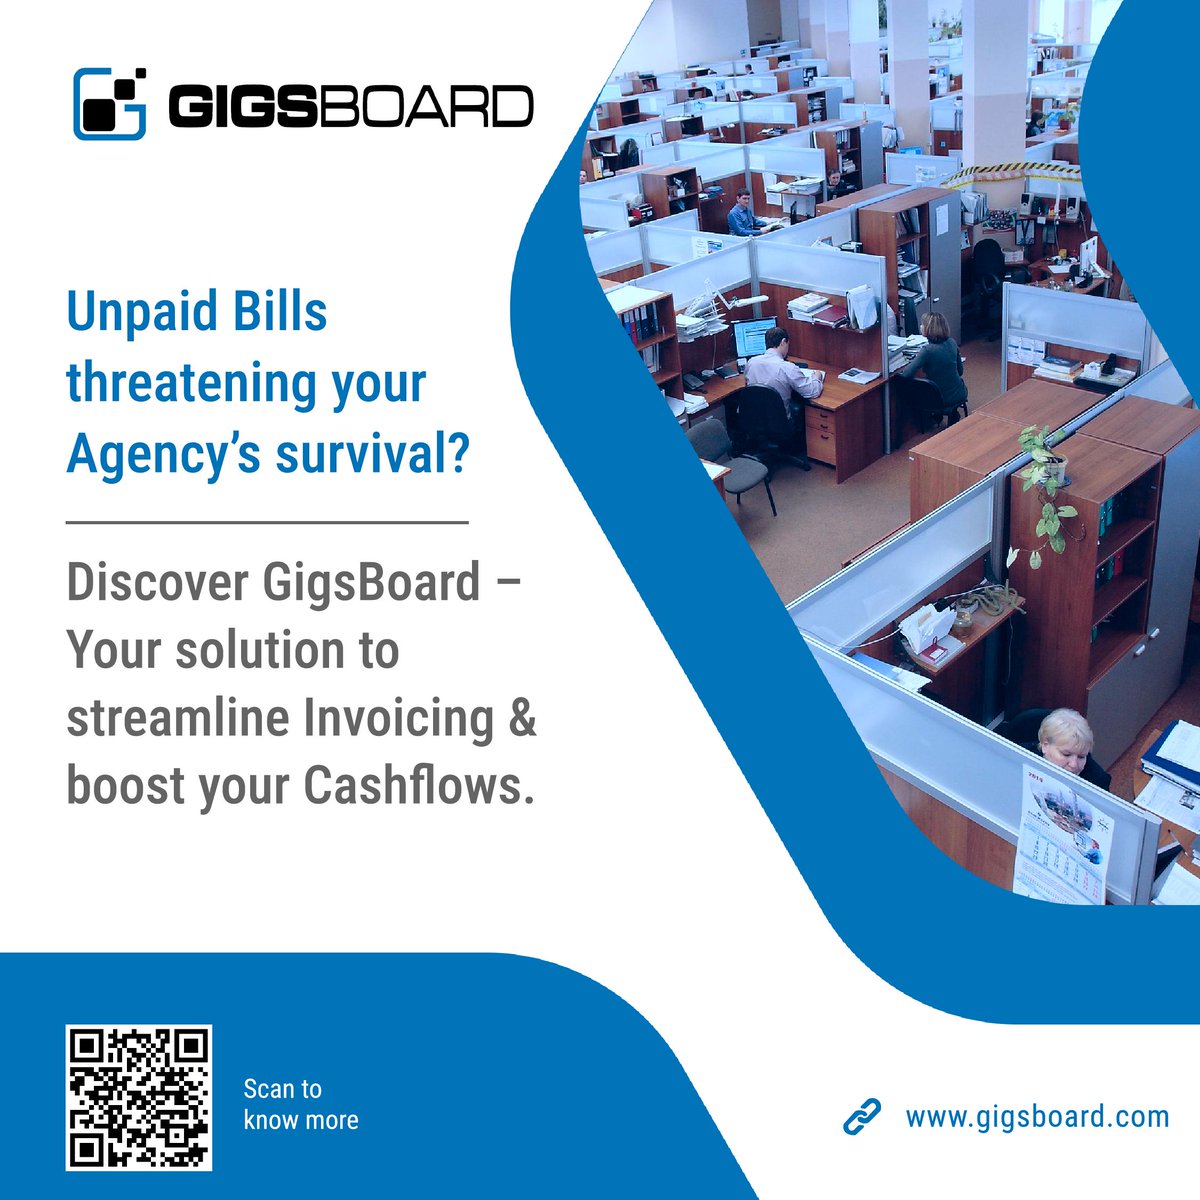 Cashflow breakdowns can disrupt the growth and even survival of any Agency, and cause a huge strain on resources.
GigsBoard can be your trusted ally in ensuring your hard work pays off.

Read more: bit.ly/3ONafHv

#InvoiceManagement #CashFlowOptimization